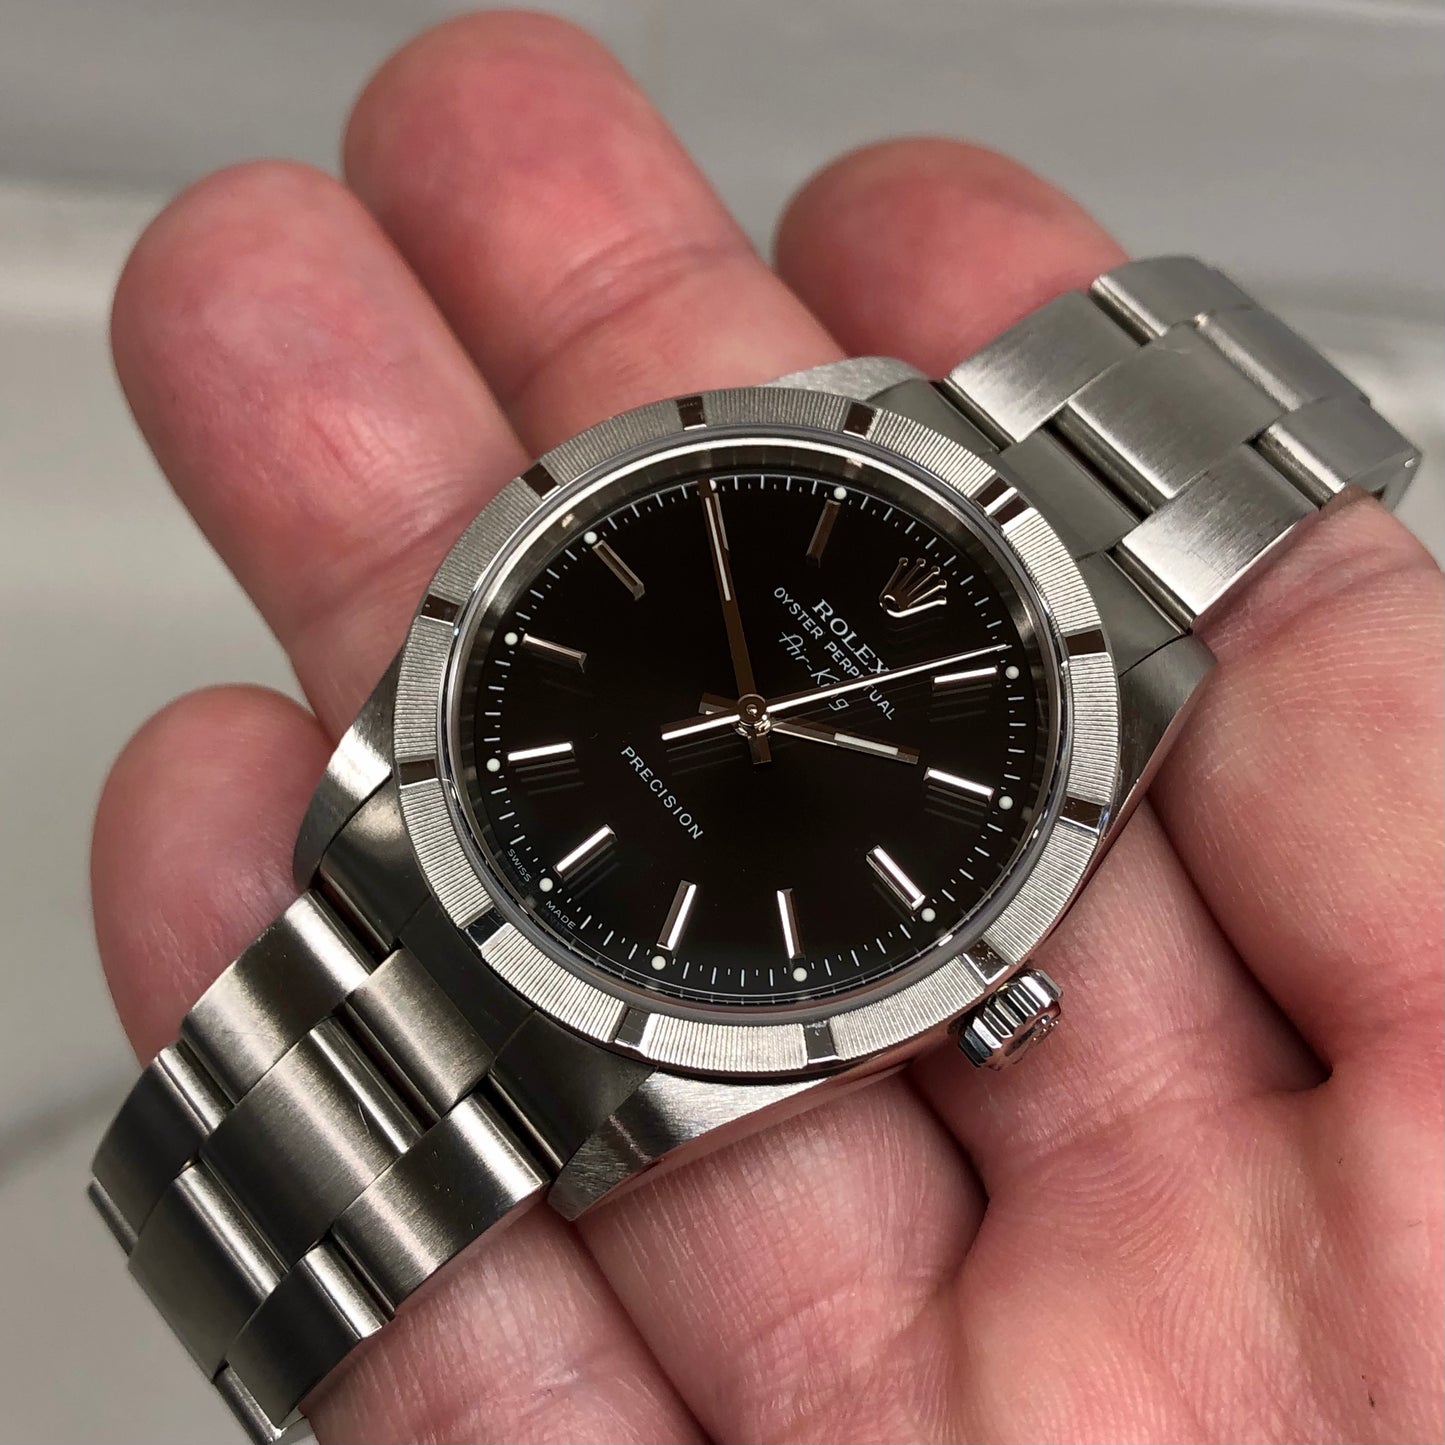 2004 Rolex Air King 14010M Black Dial Oyster Engine Turned Automatic Wristwatch - HASHTAGWATCHCO